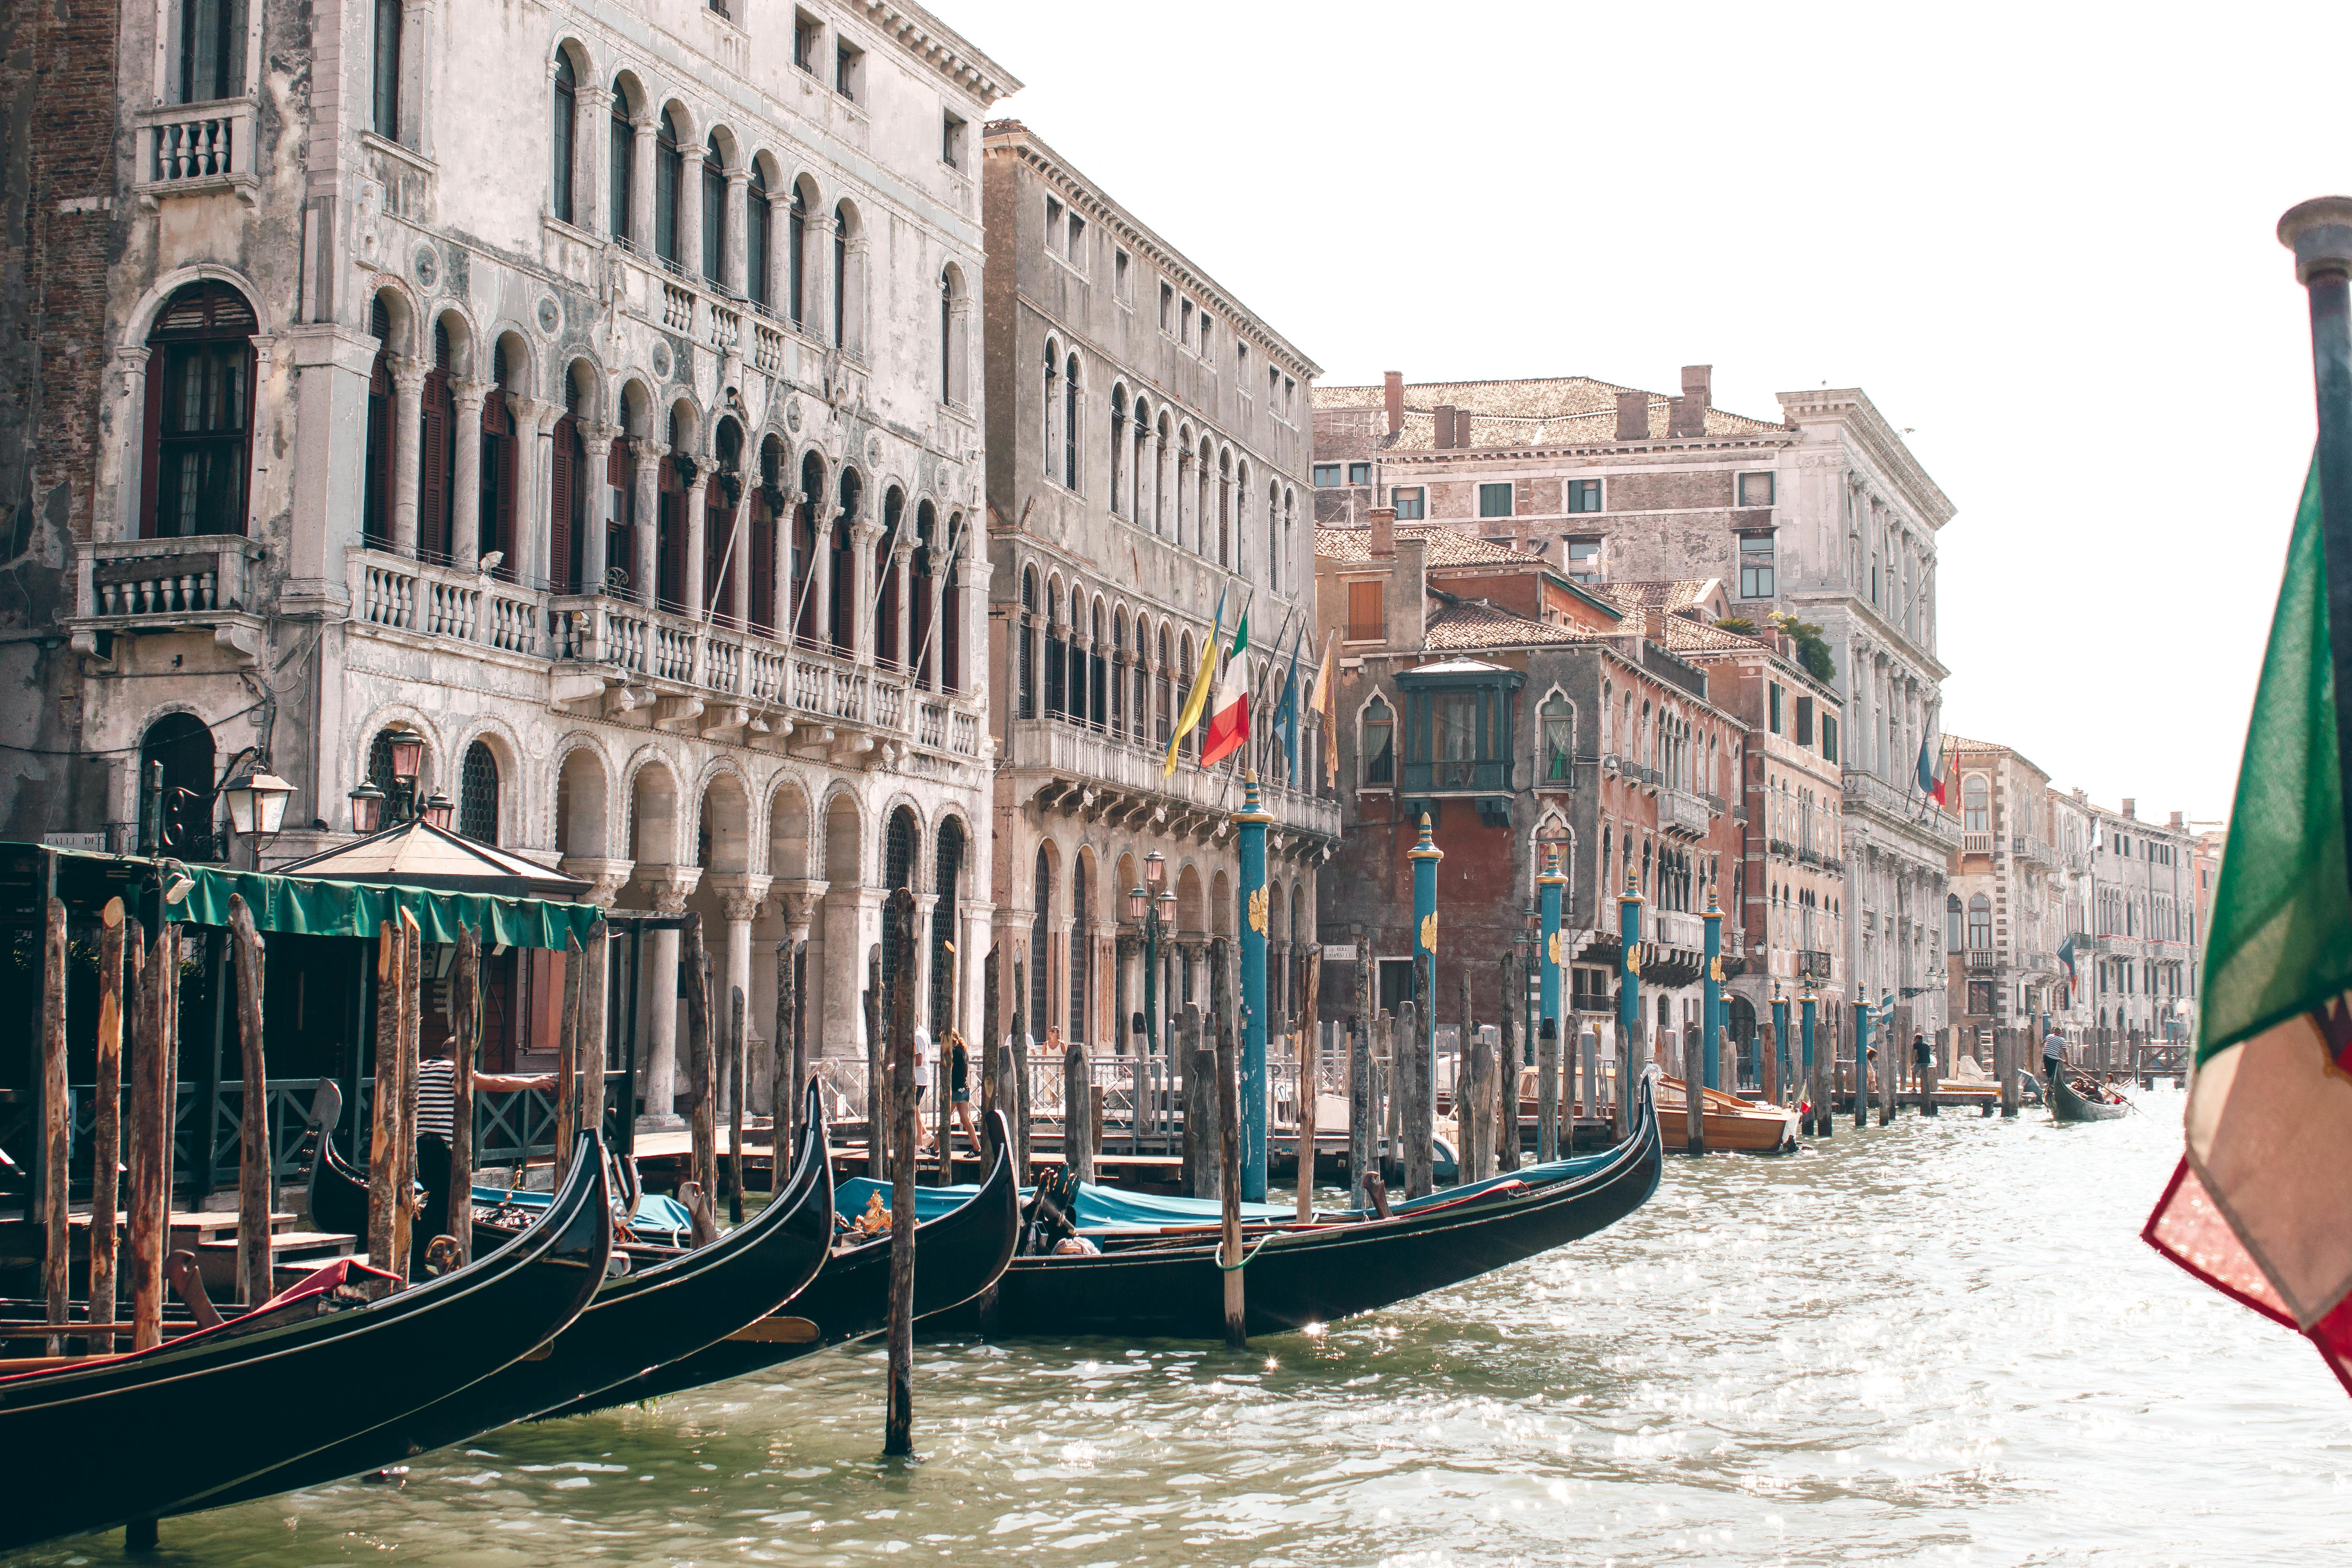 gondolas moored on canal in venice